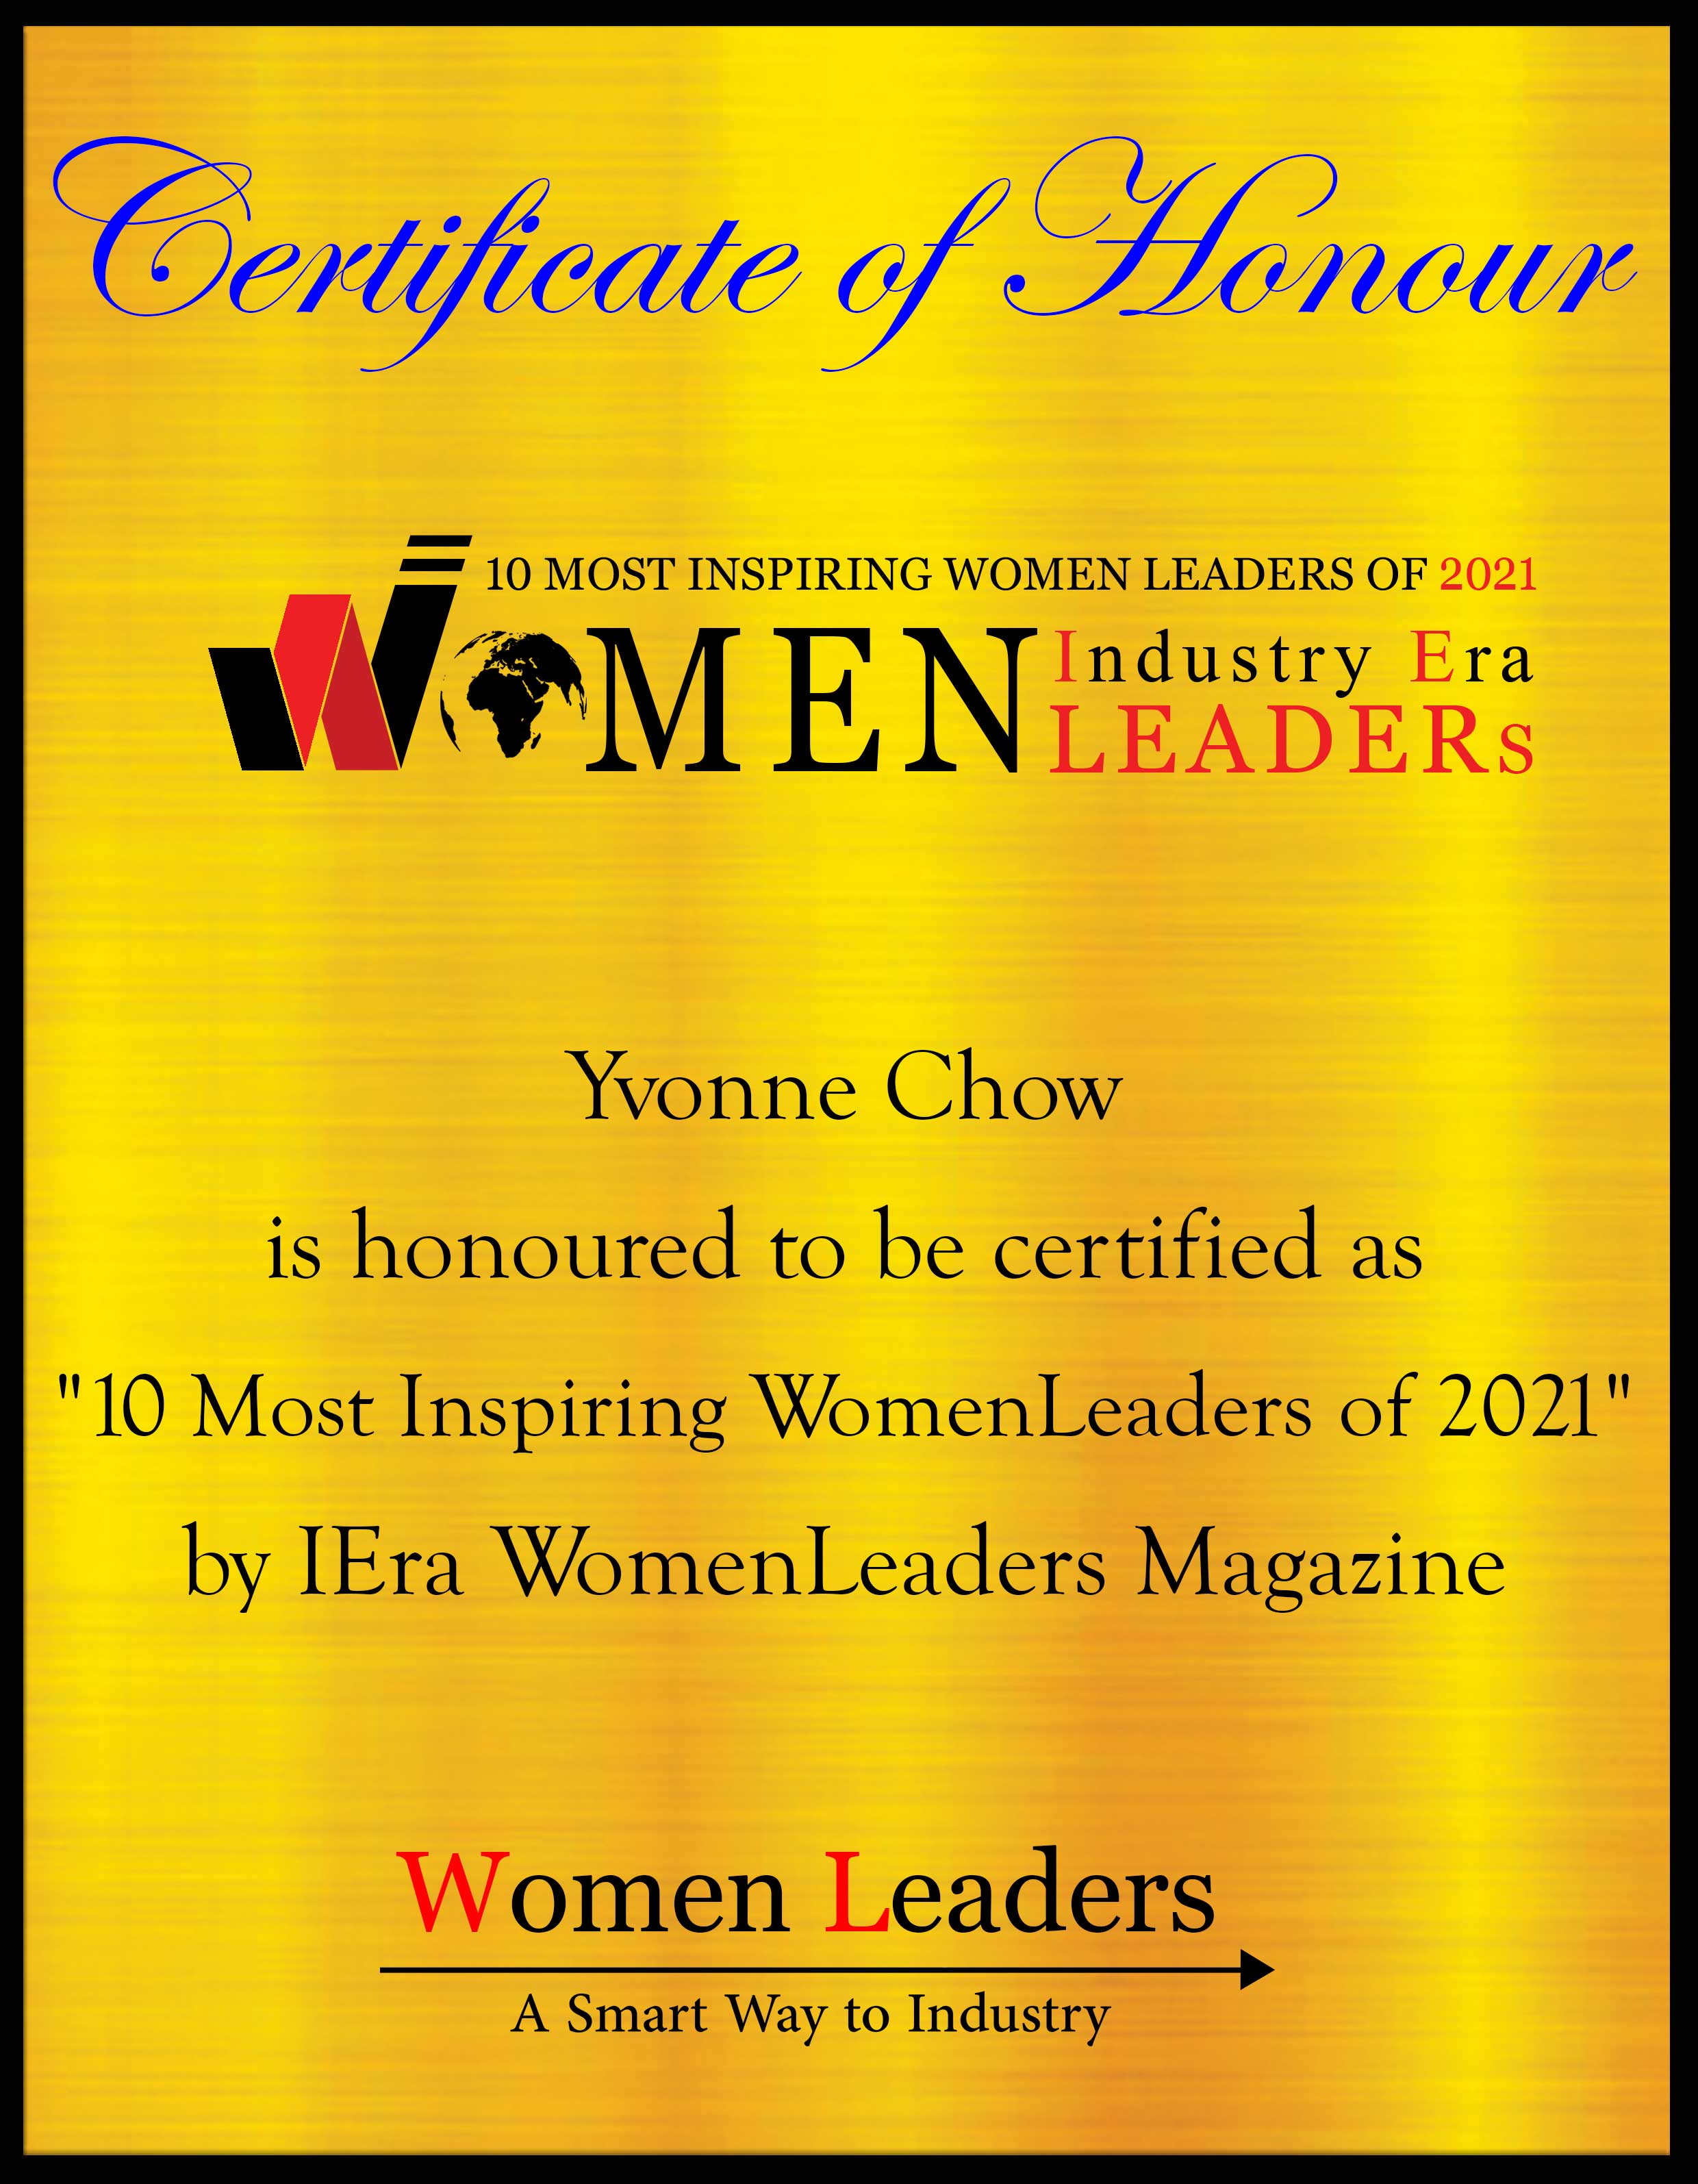 Yvonne Chow, Lead Visionary & Co-founder of Envisione Studio Ltd Most Inspiring WomenLeaders of 2021